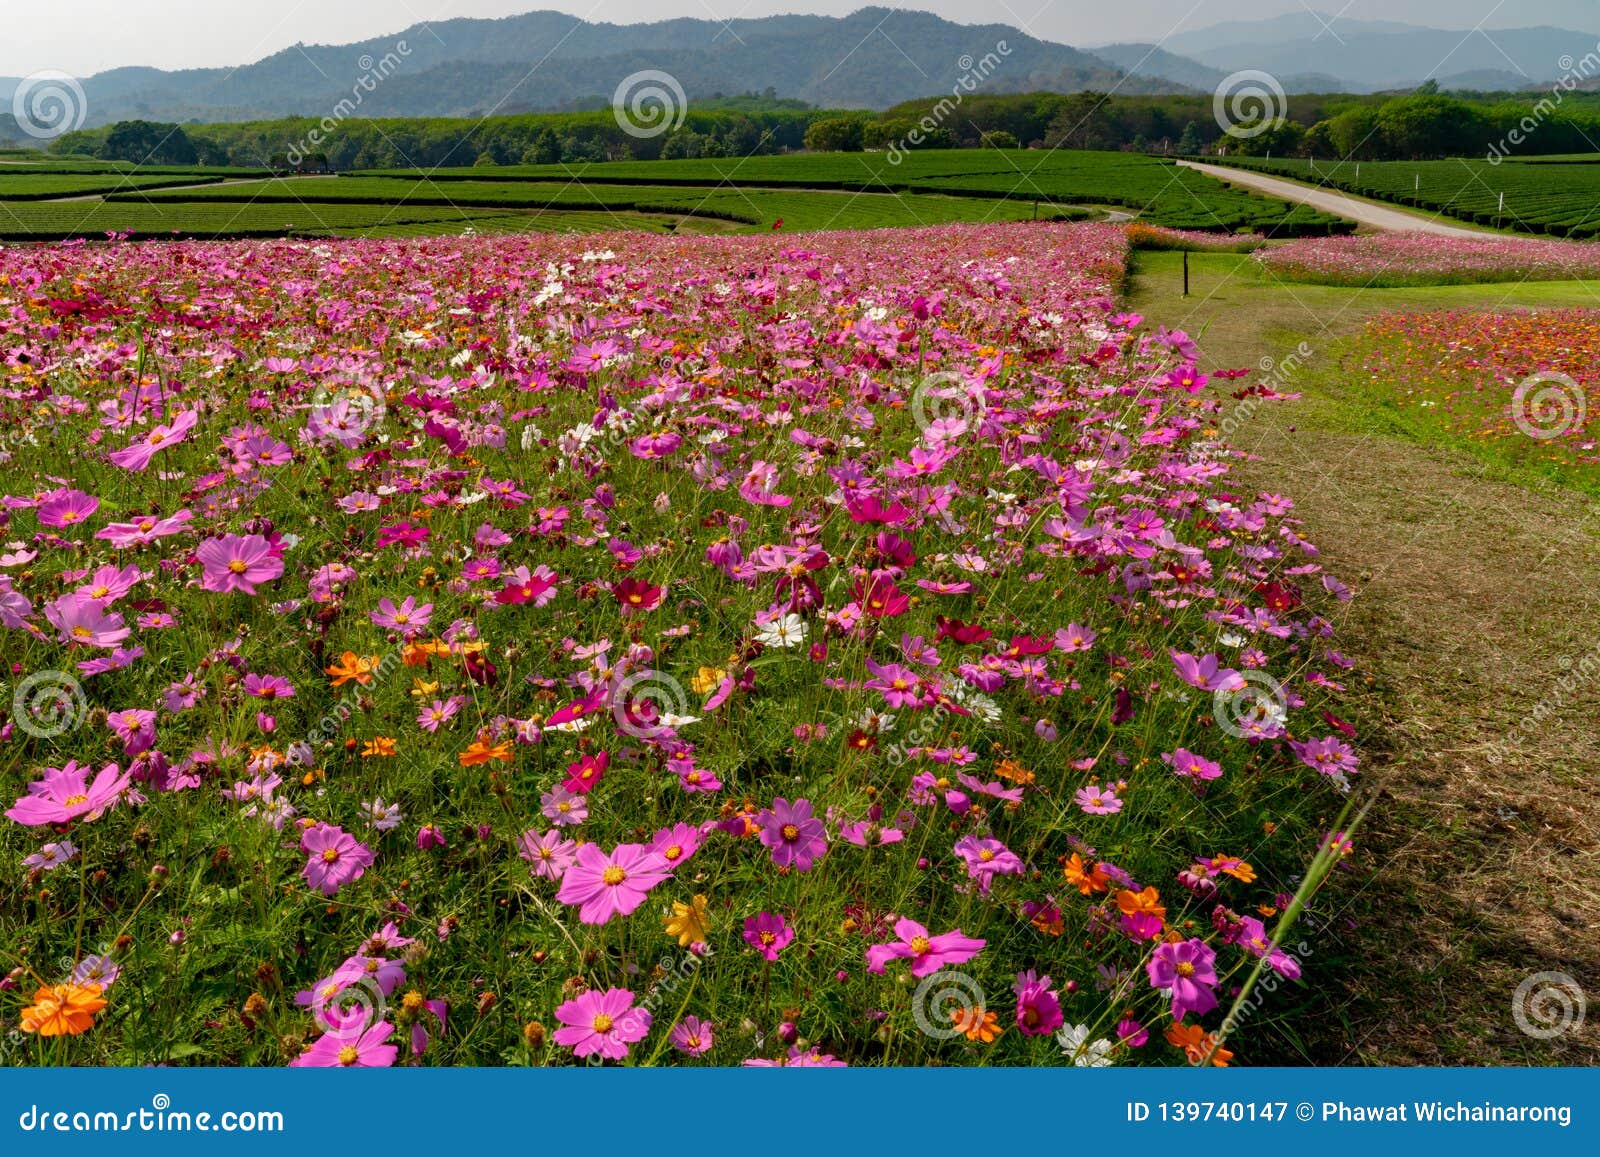 Field of Colorful Cosmos Flowers on the Hill. Stock Image - Image of  flower, nature: 139740147